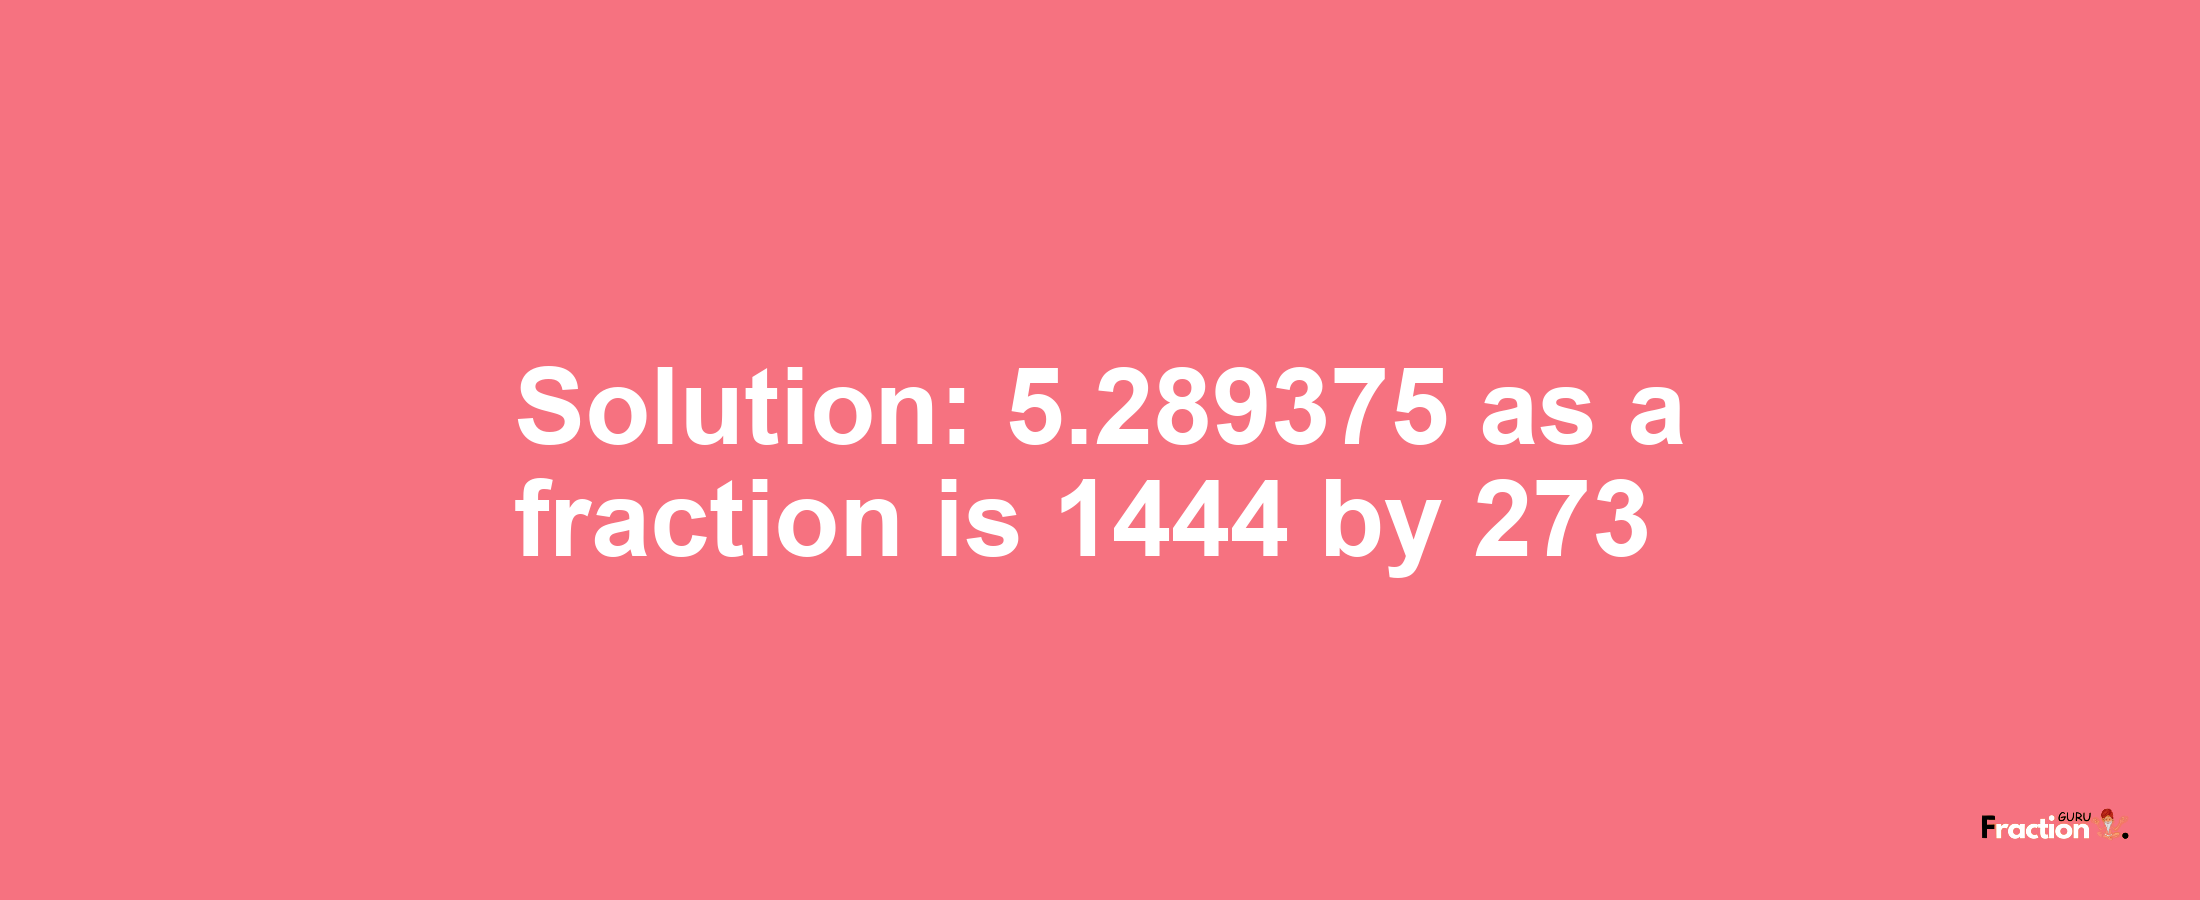 Solution:5.289375 as a fraction is 1444/273